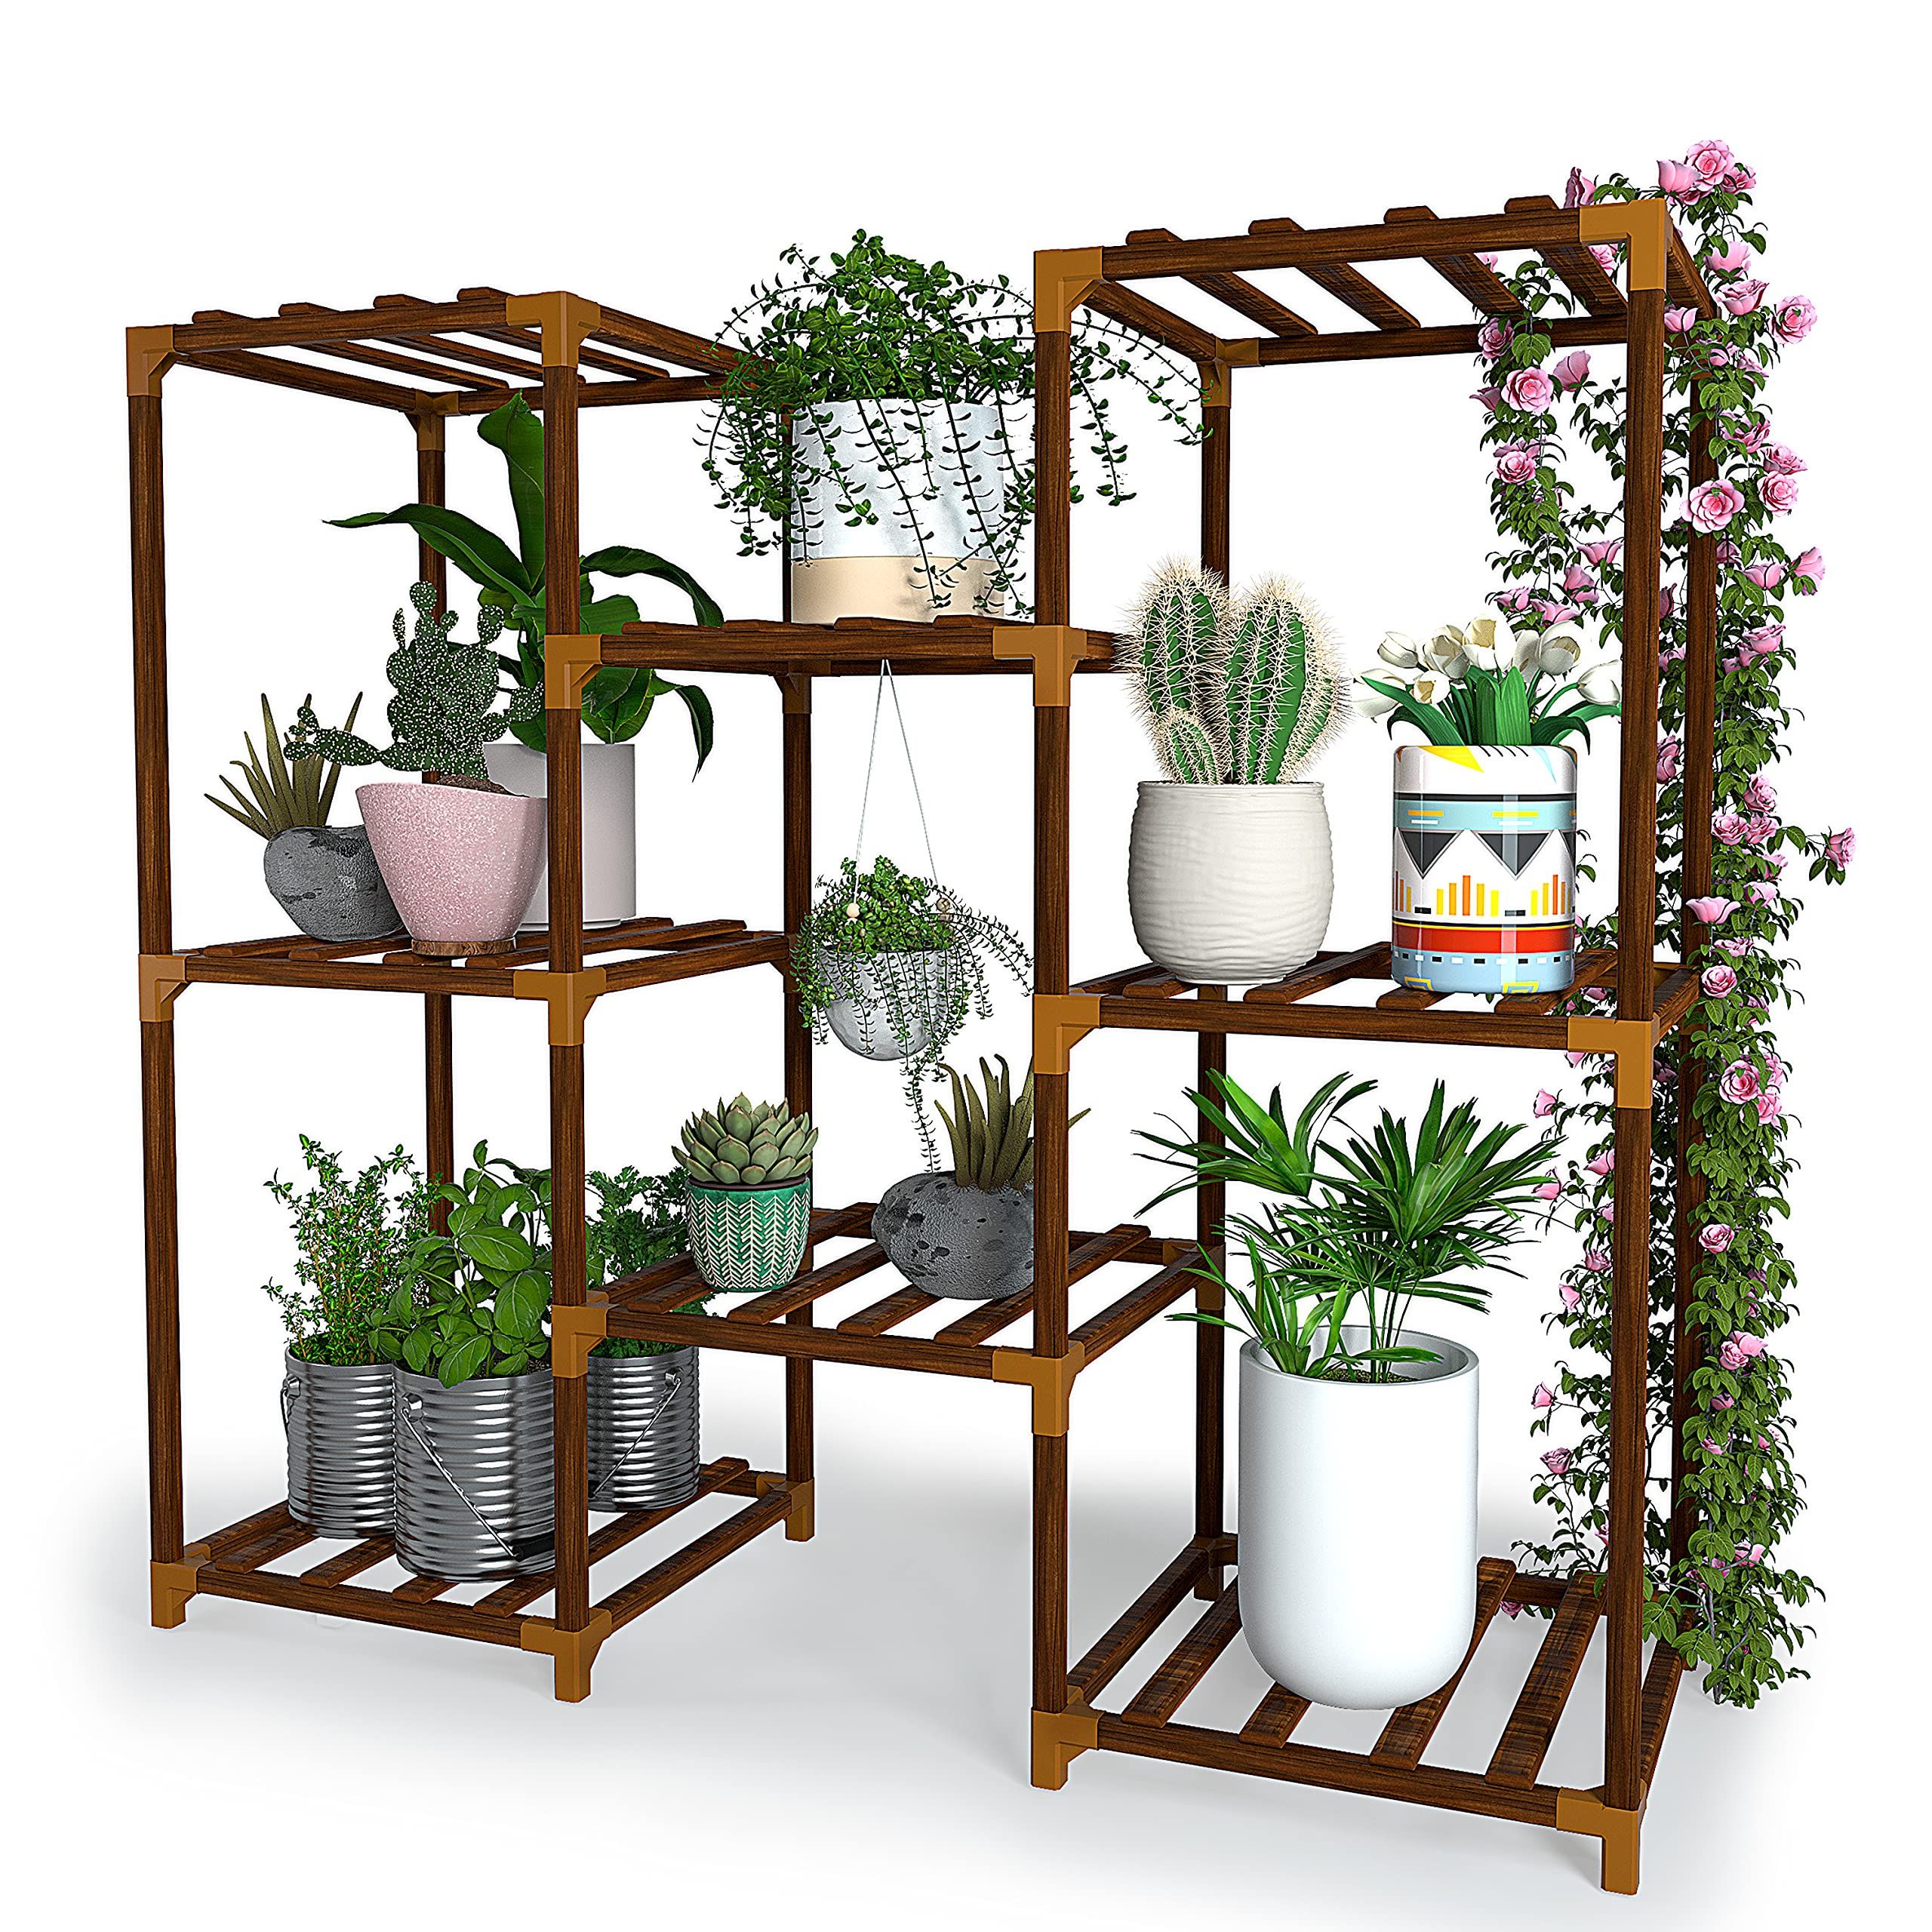 New England Stories Plant Stand Indoor, Outdoor Wood Plant Stands For  Multiple Plants, Plant Shelf Ladder Table Plant Pot Stand For Living Room,  Patio, Balcony, Plant Gardening Gift For Most Up To Date Wood Plant Stands (View 10 of 15)